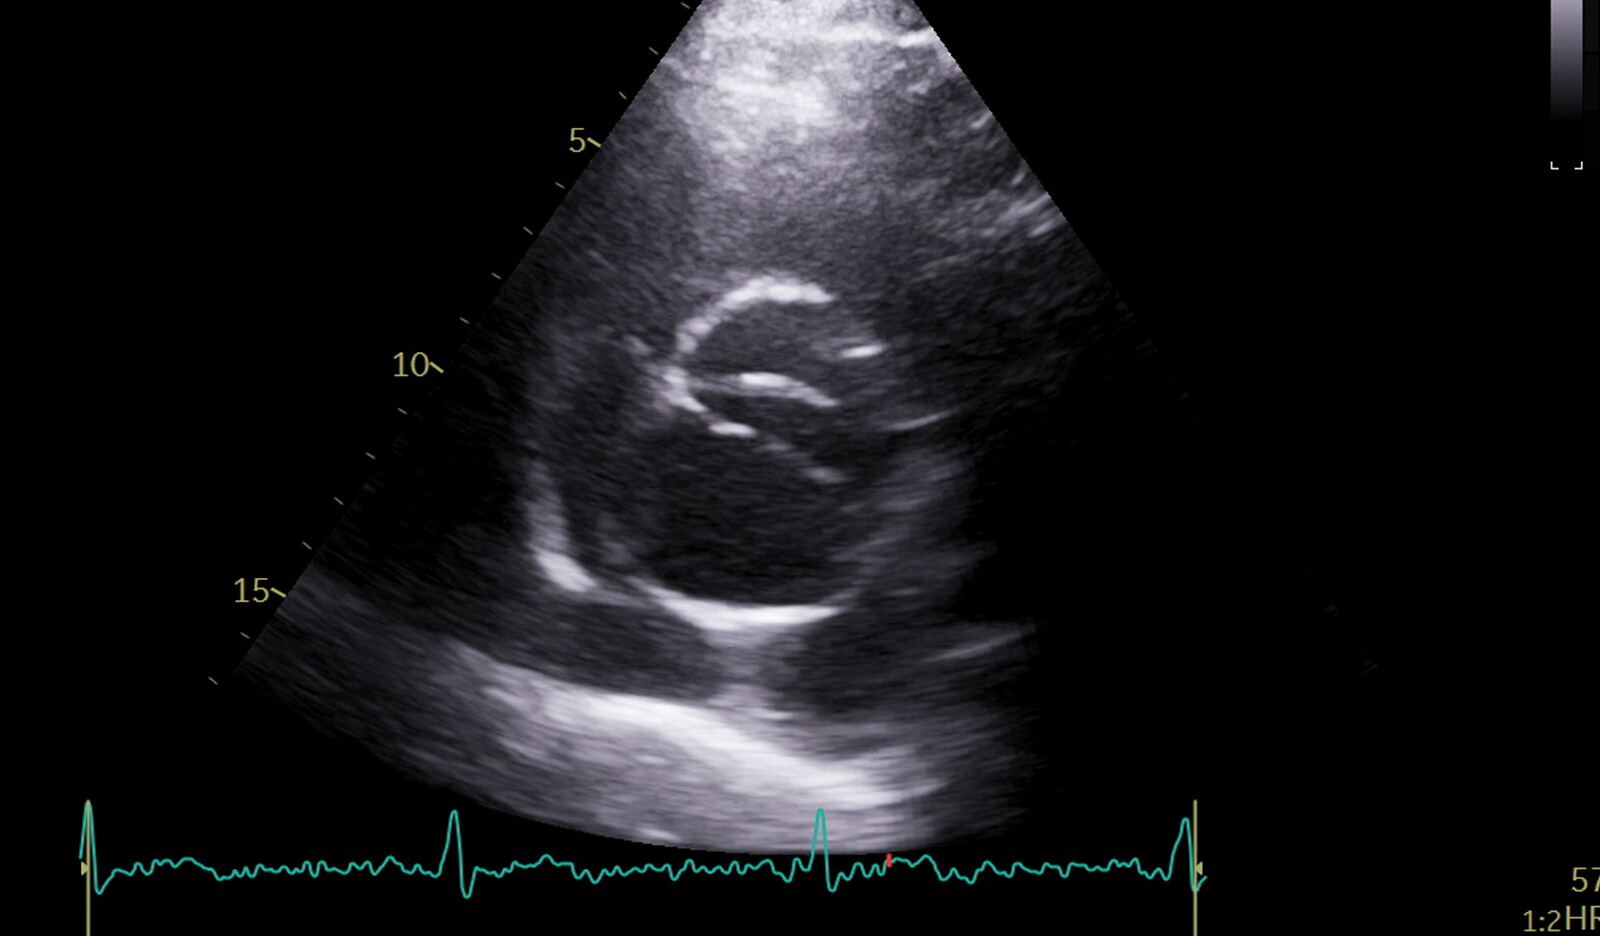 Image of SICM septic shock septic cardiomyopathy sepsis mitral annular plane systolic excursion MAPSE LVEF    Online PoCUS Training